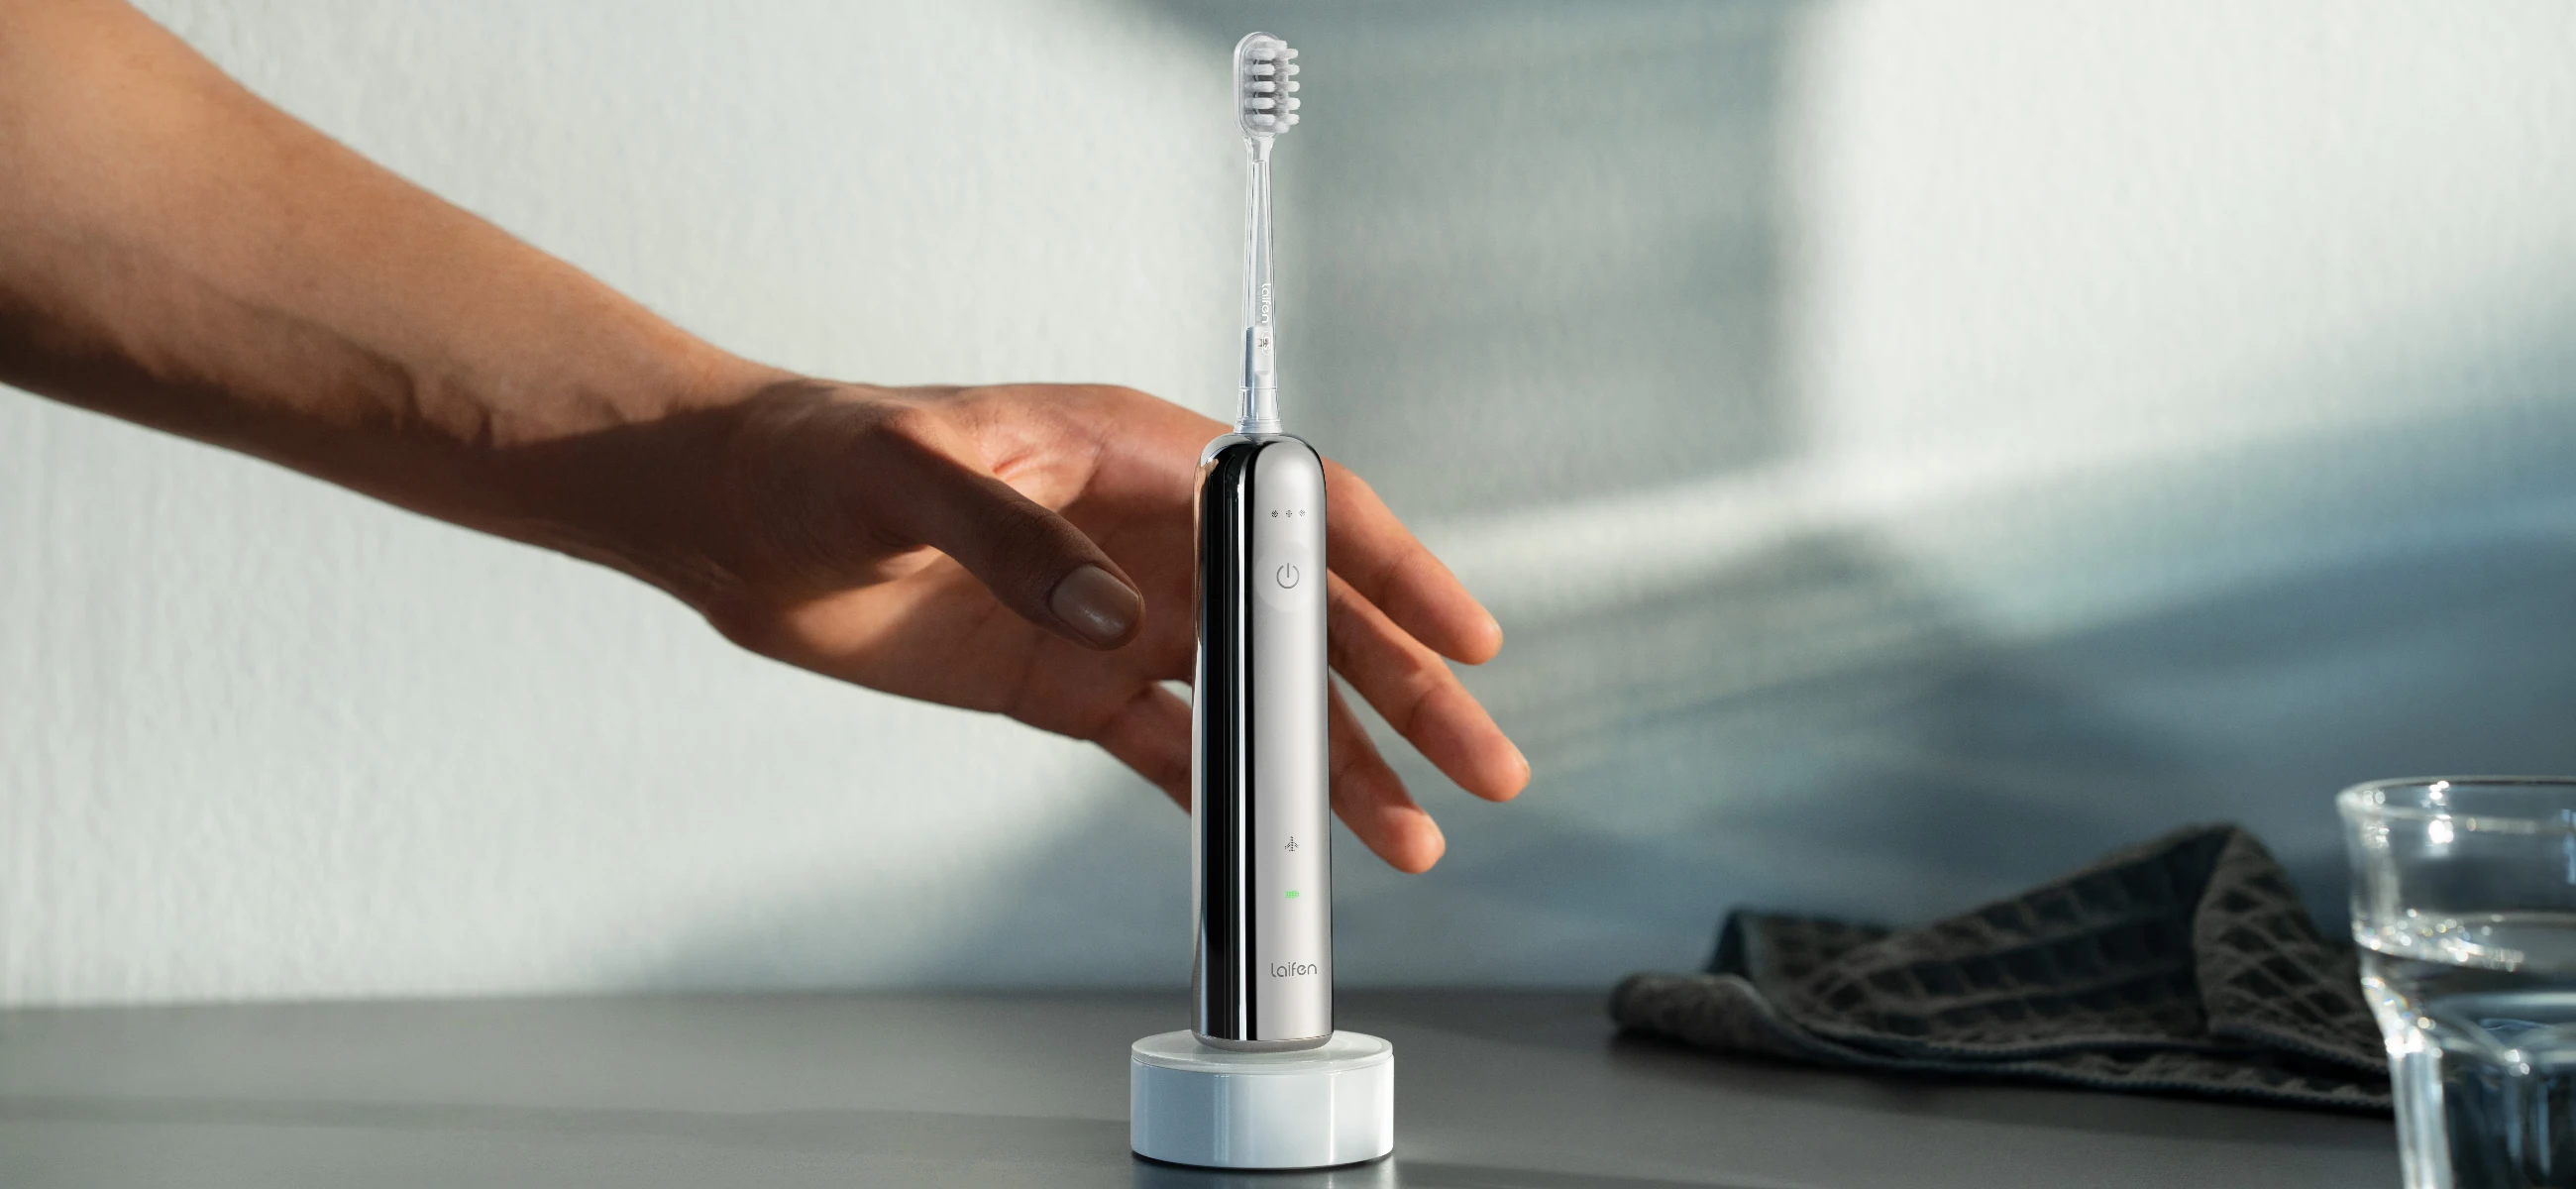 Electric toothbrush accessories: Products, reviews and how-to DIY